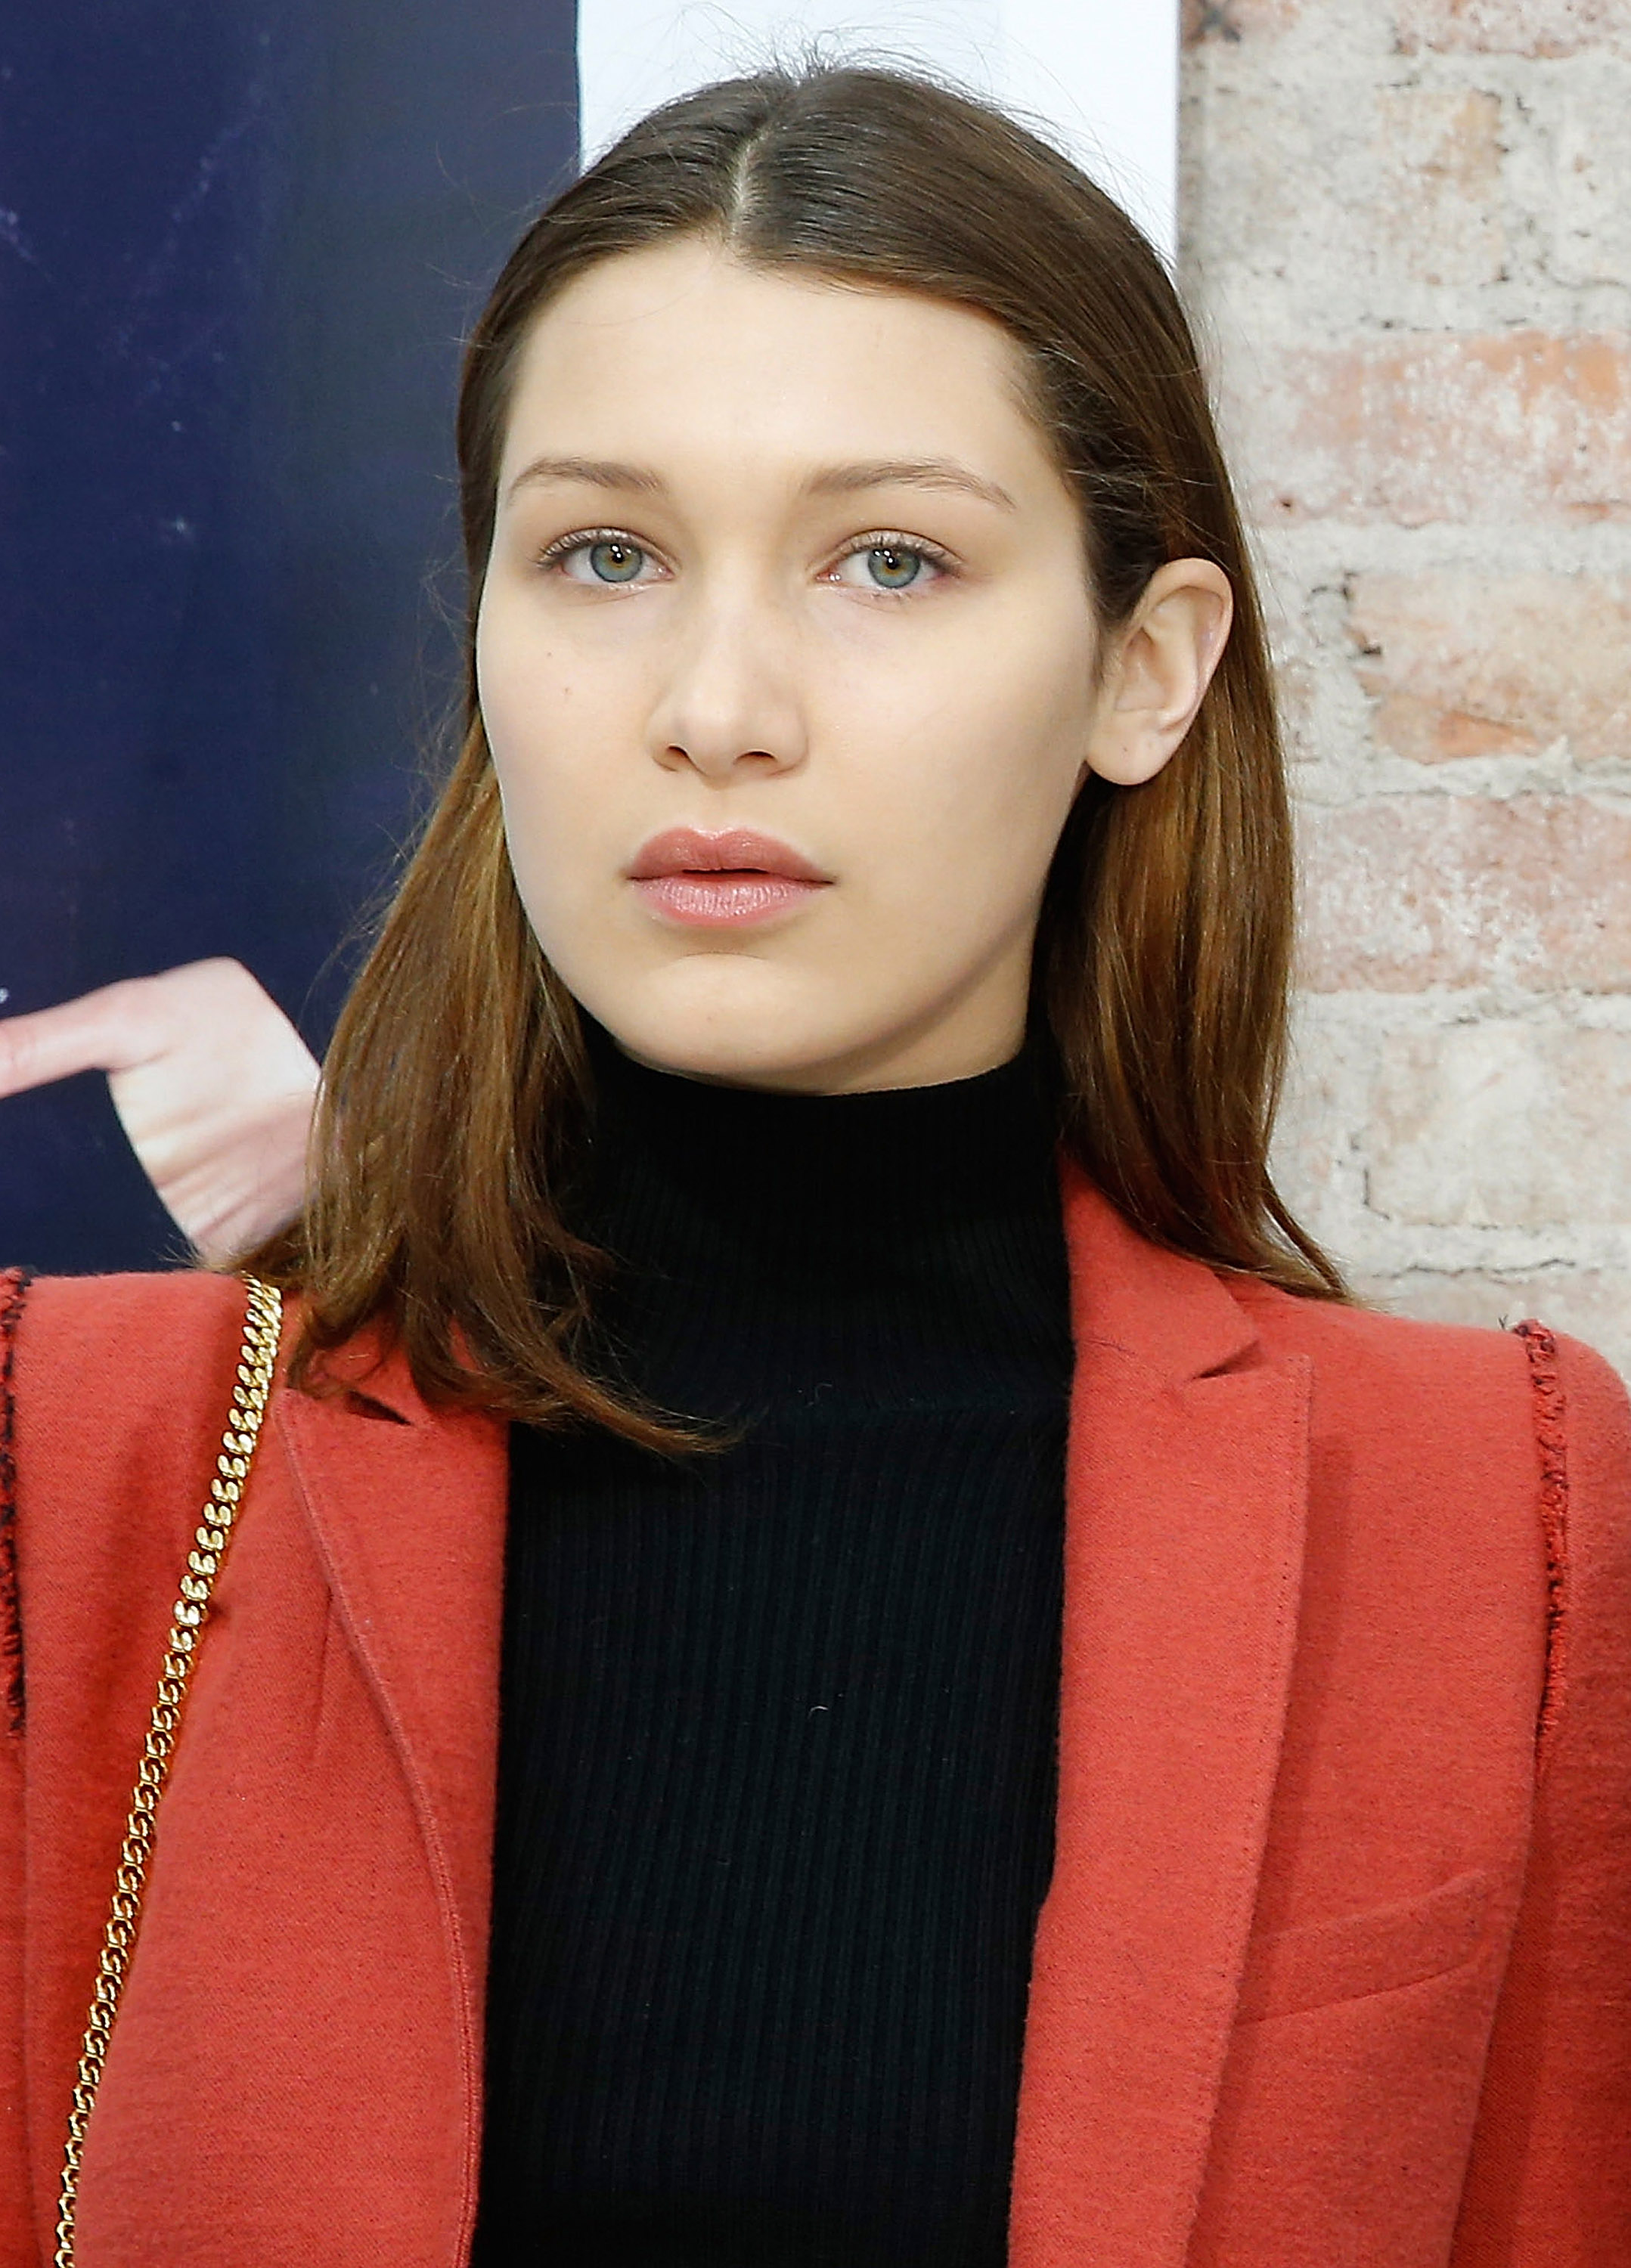 Bella Hadid attends OnePiece New York Concept Store Grand Opening at OnePiece Concept Store on November 7, 2014 in New York City. | Source: Getty Images